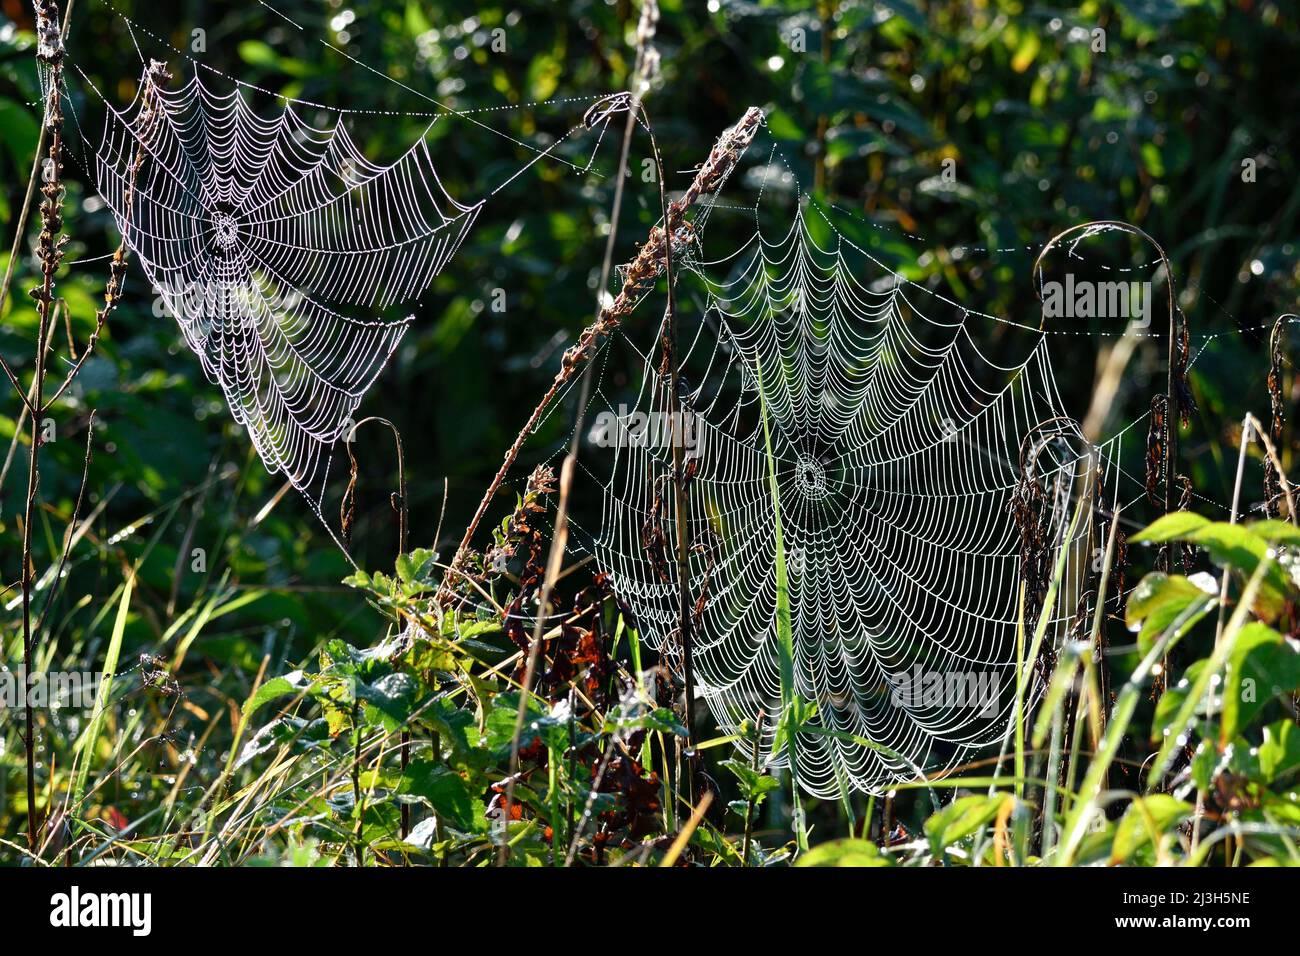 France, Doubs, insect, spider web, dew Stock Photo